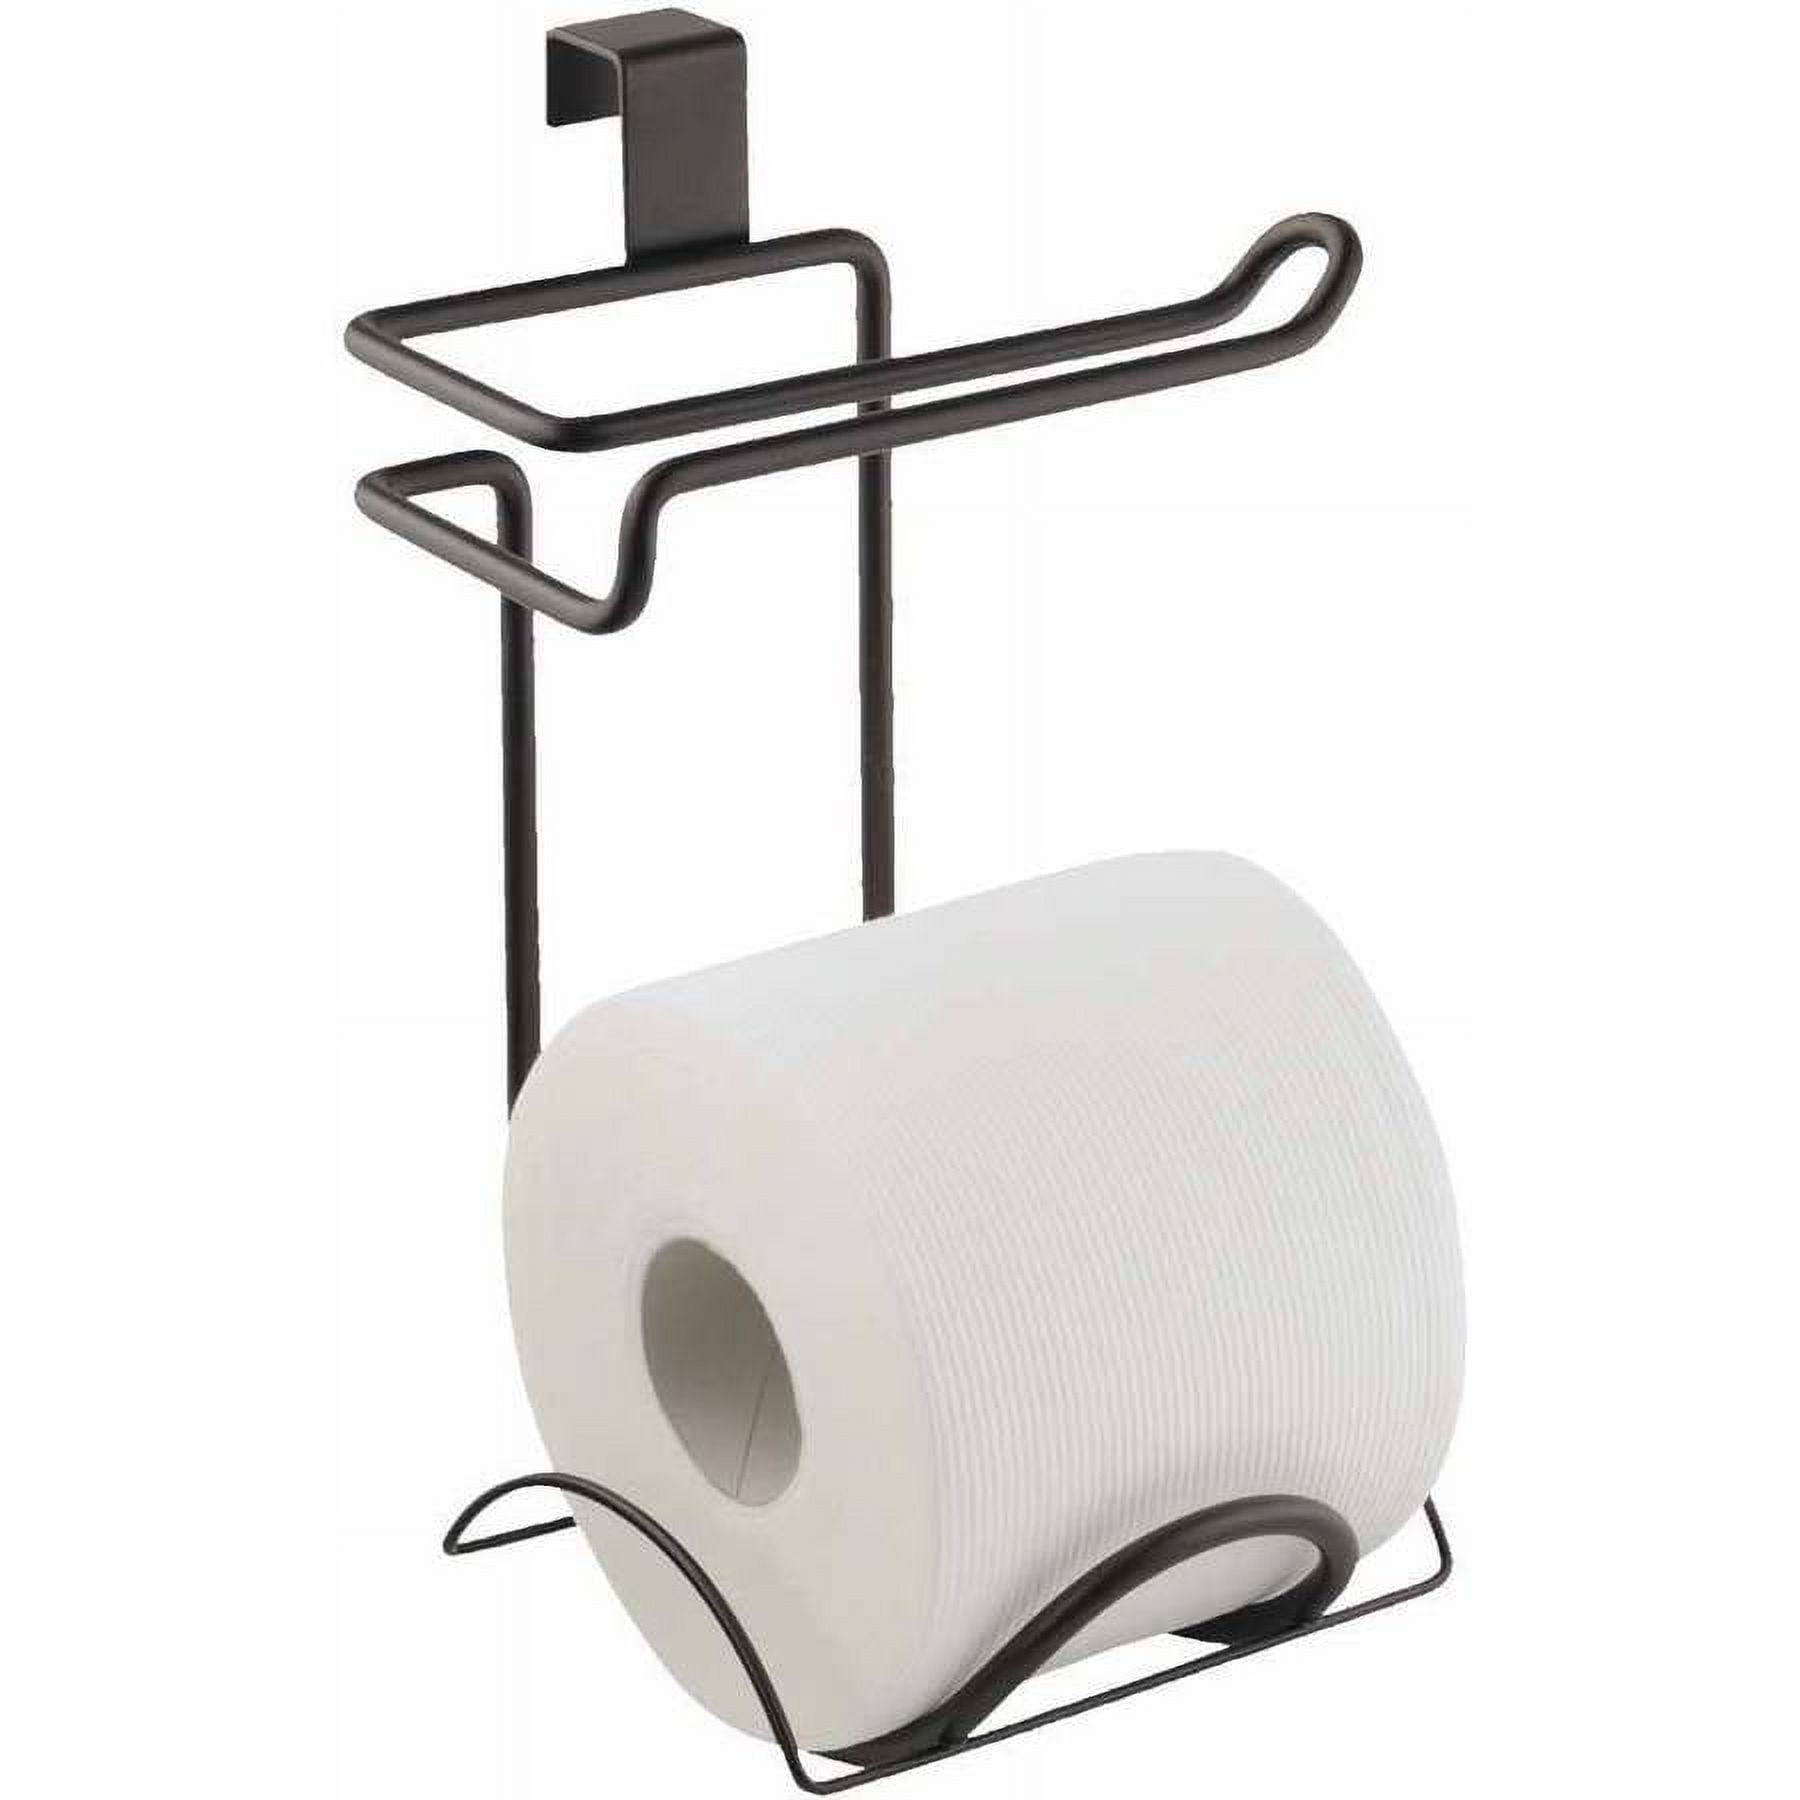 Mainstays Chrome Over-the-Tank Toilet Paper Holder, 7.5 inch x 3.5 inch x 1.4 inch